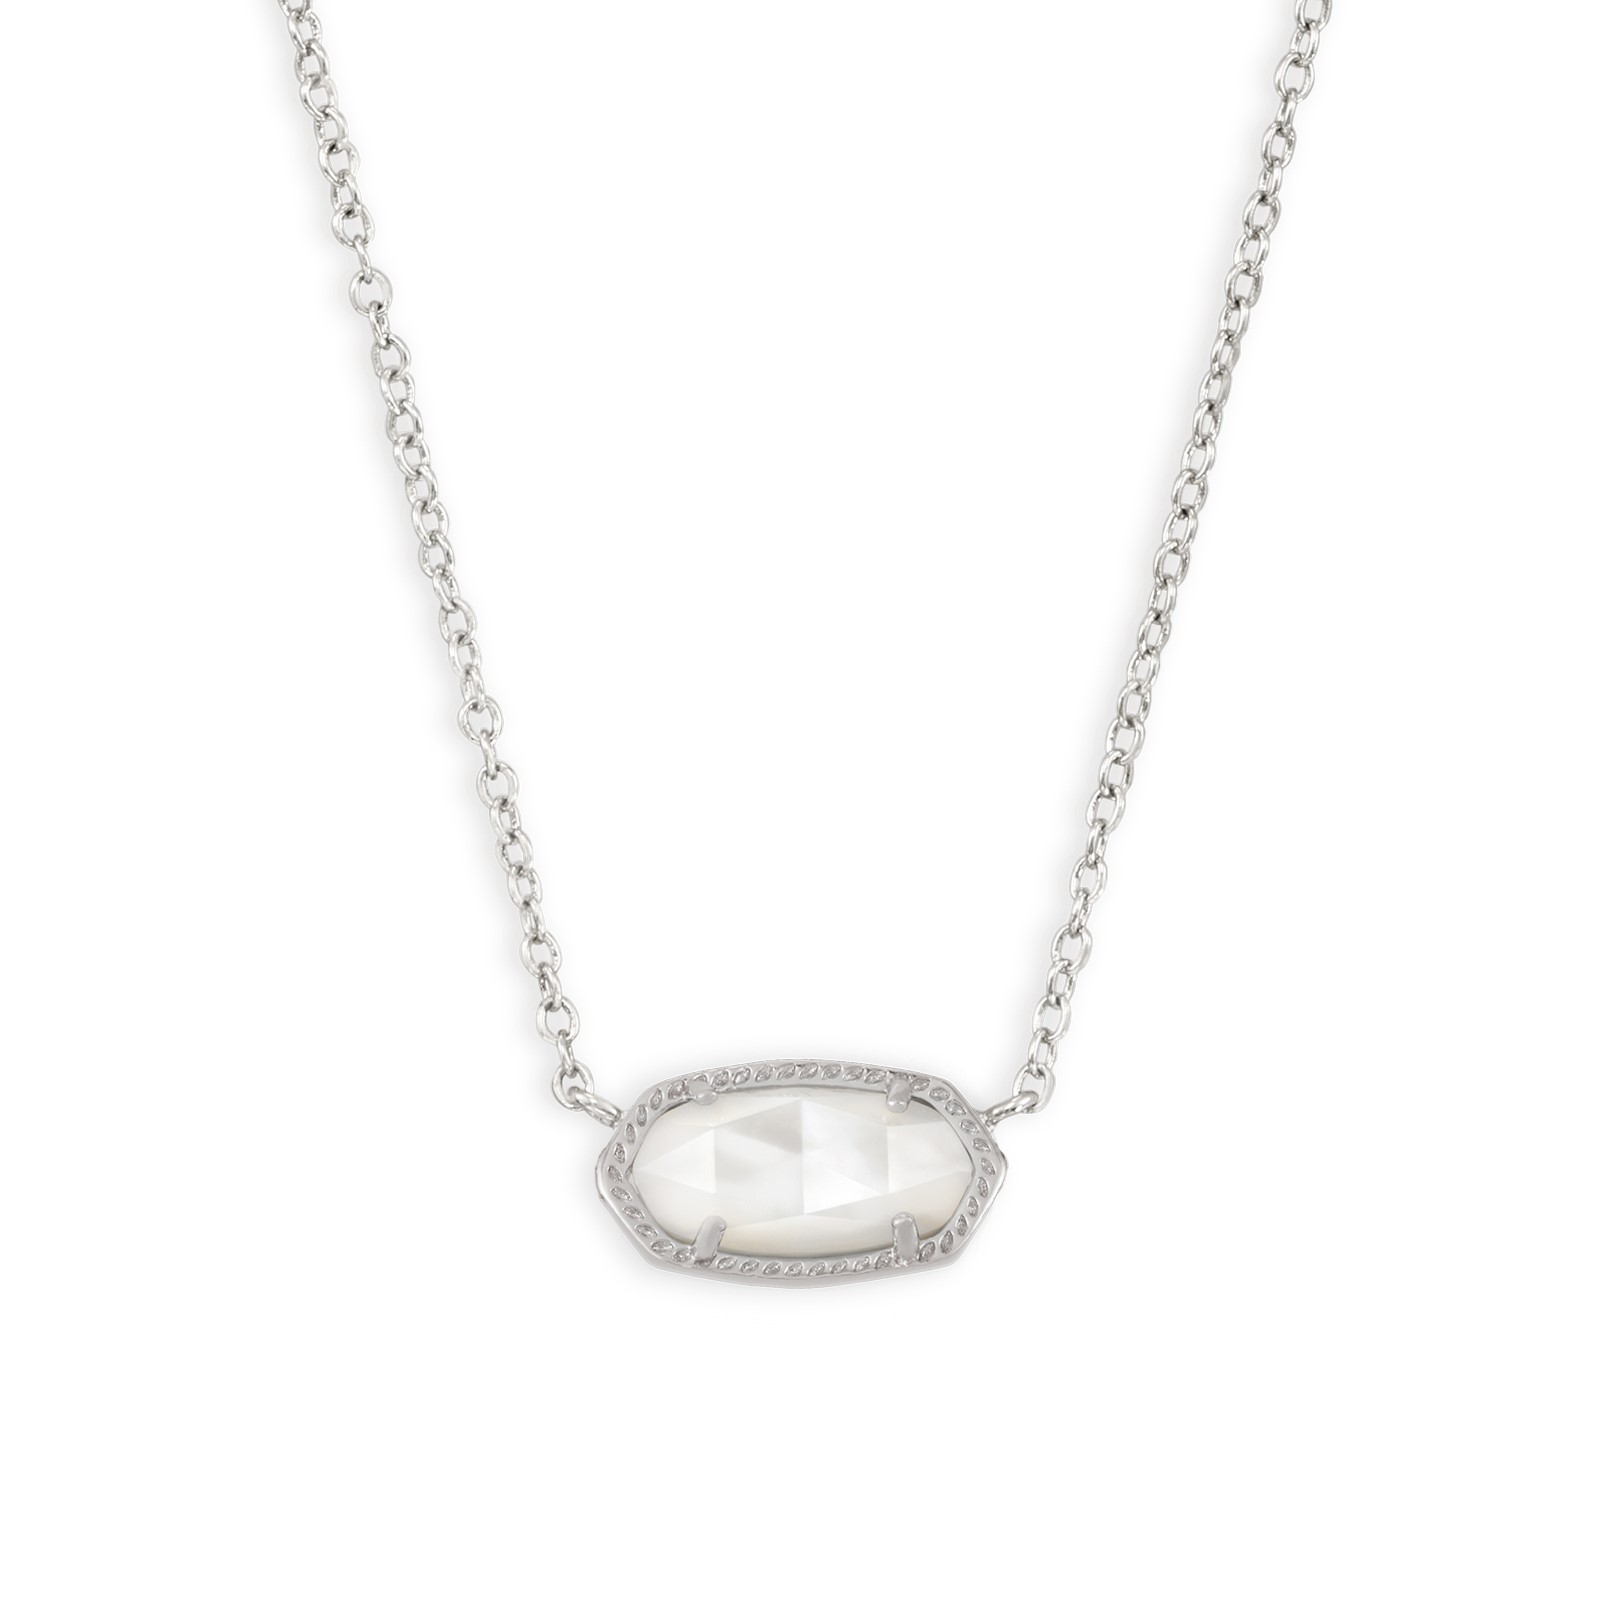 Kendra Scott Elisa Pendant Necklace in Ivory Mother-Of-Pearl